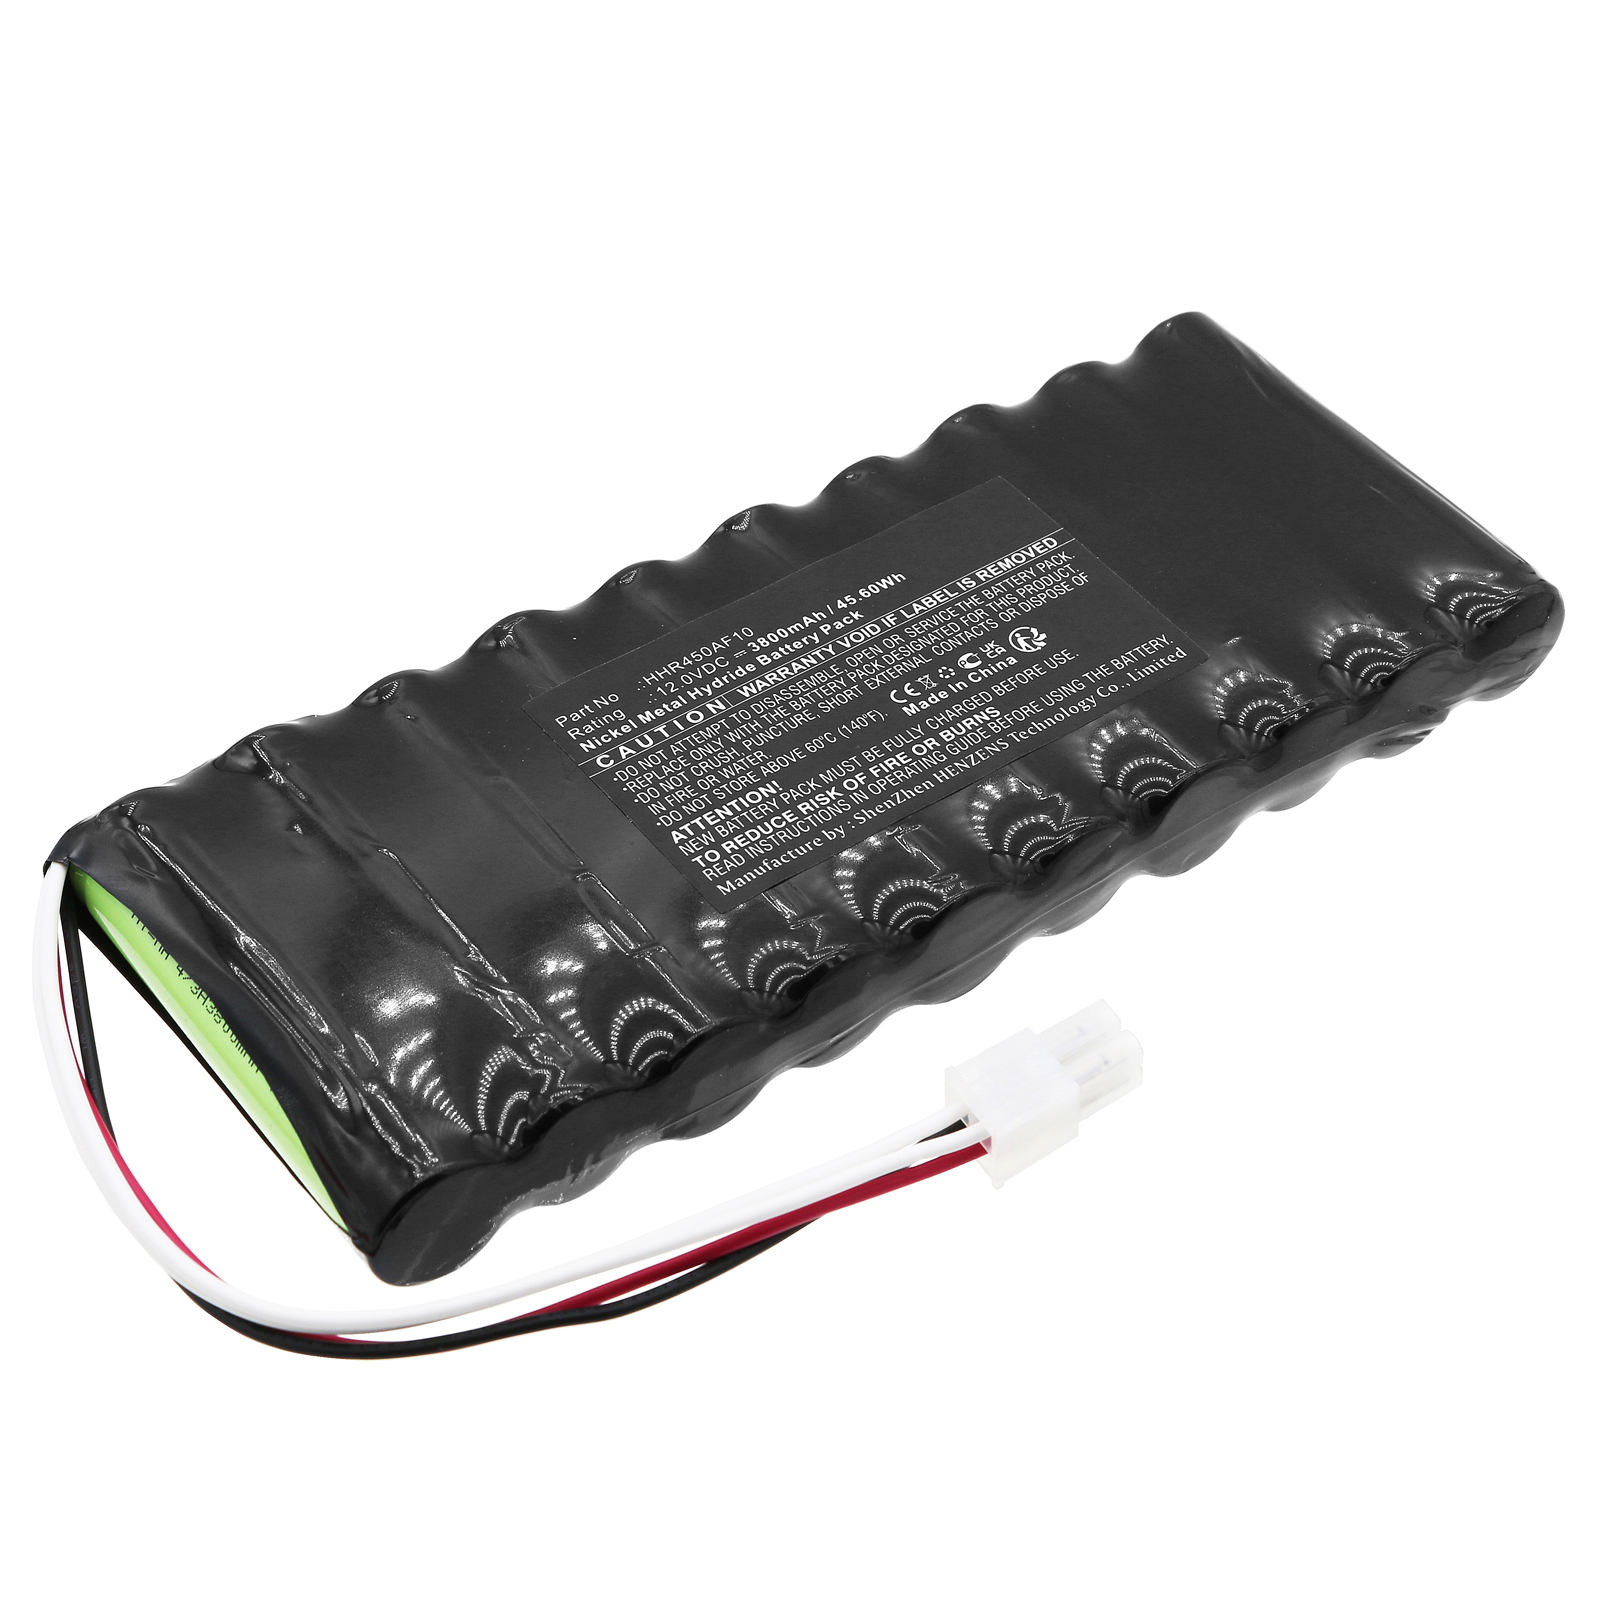 Synergy Digital Equipment Battery, Compatible with VAROS HHR450AF10 Equipment Battery (Ni-MH, 12V, 3800mAh)